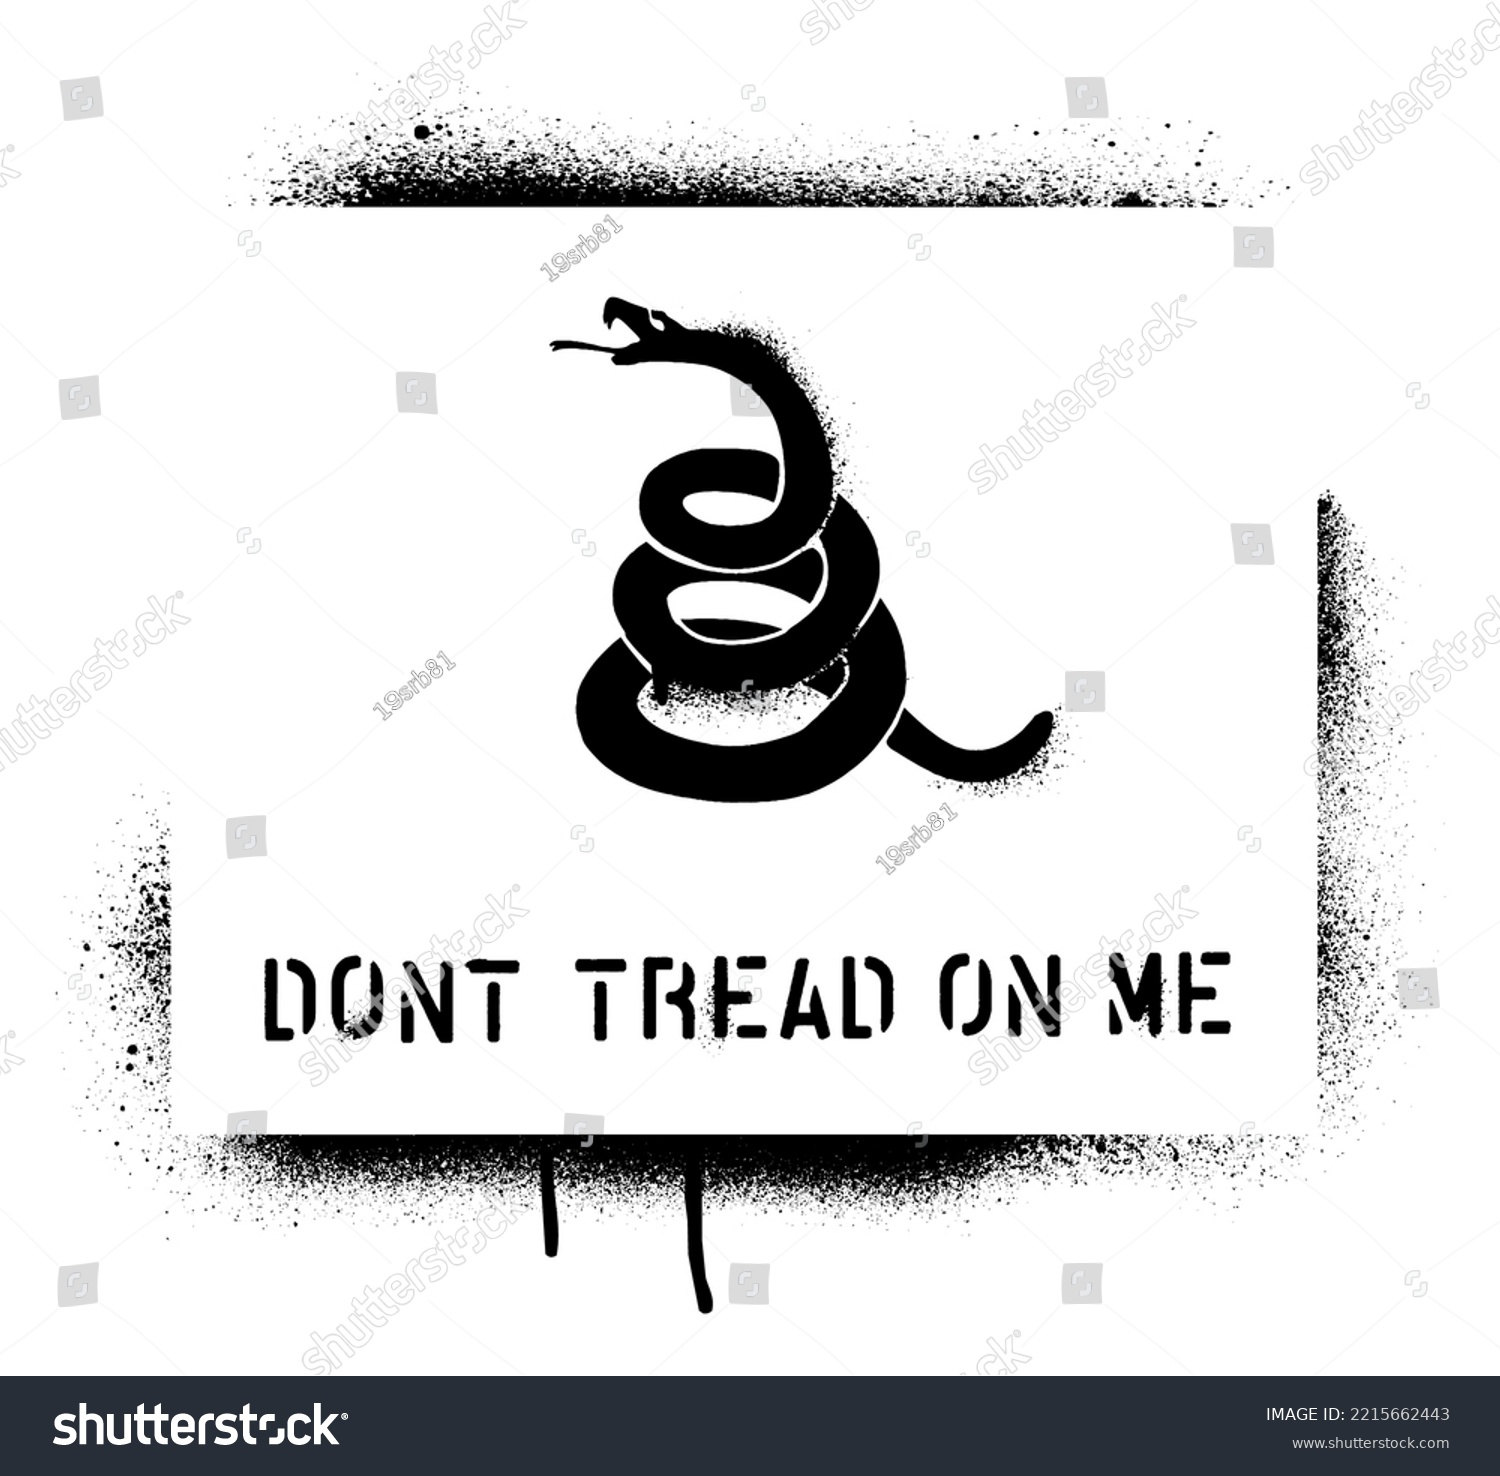 SVG of Timber rattlesnake  silhouette and inscription DONT TREAD ON ME. The concept of living in freedom. Spray graffiti stencil. svg